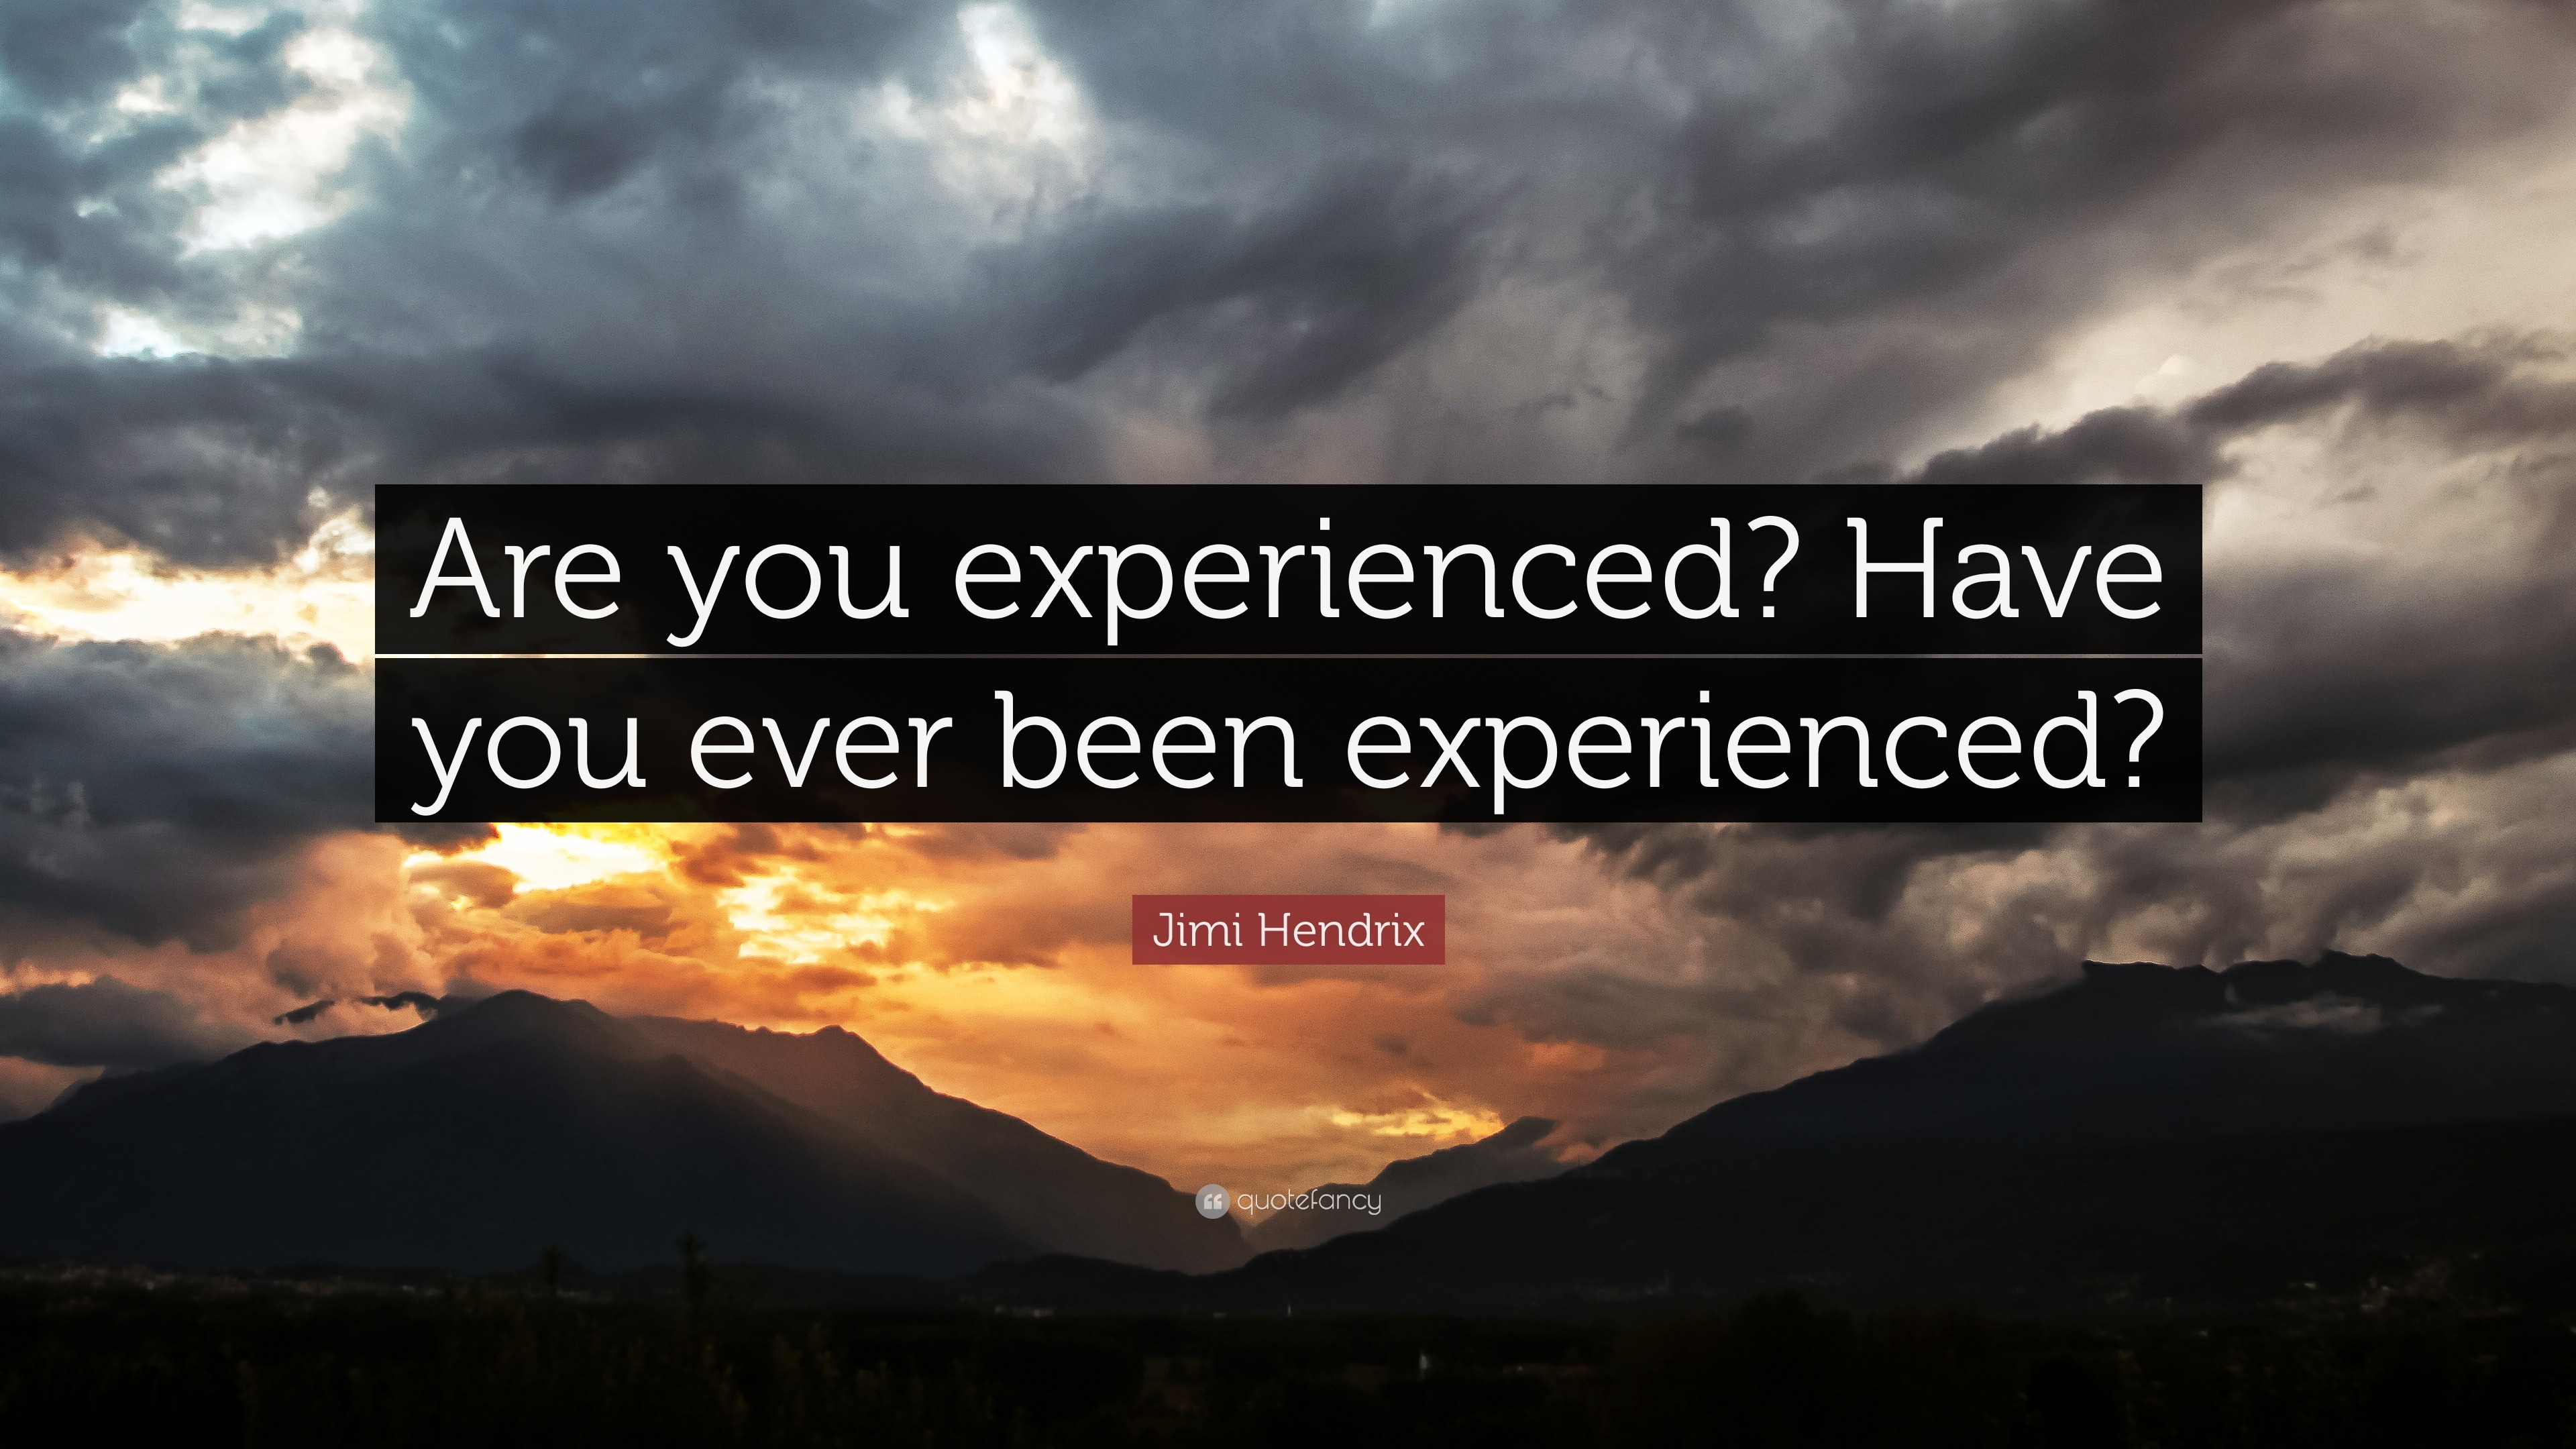 9807-Jimi-Hendrix-Quote-Are-you-experienced-Have-you-ever-been.jpg